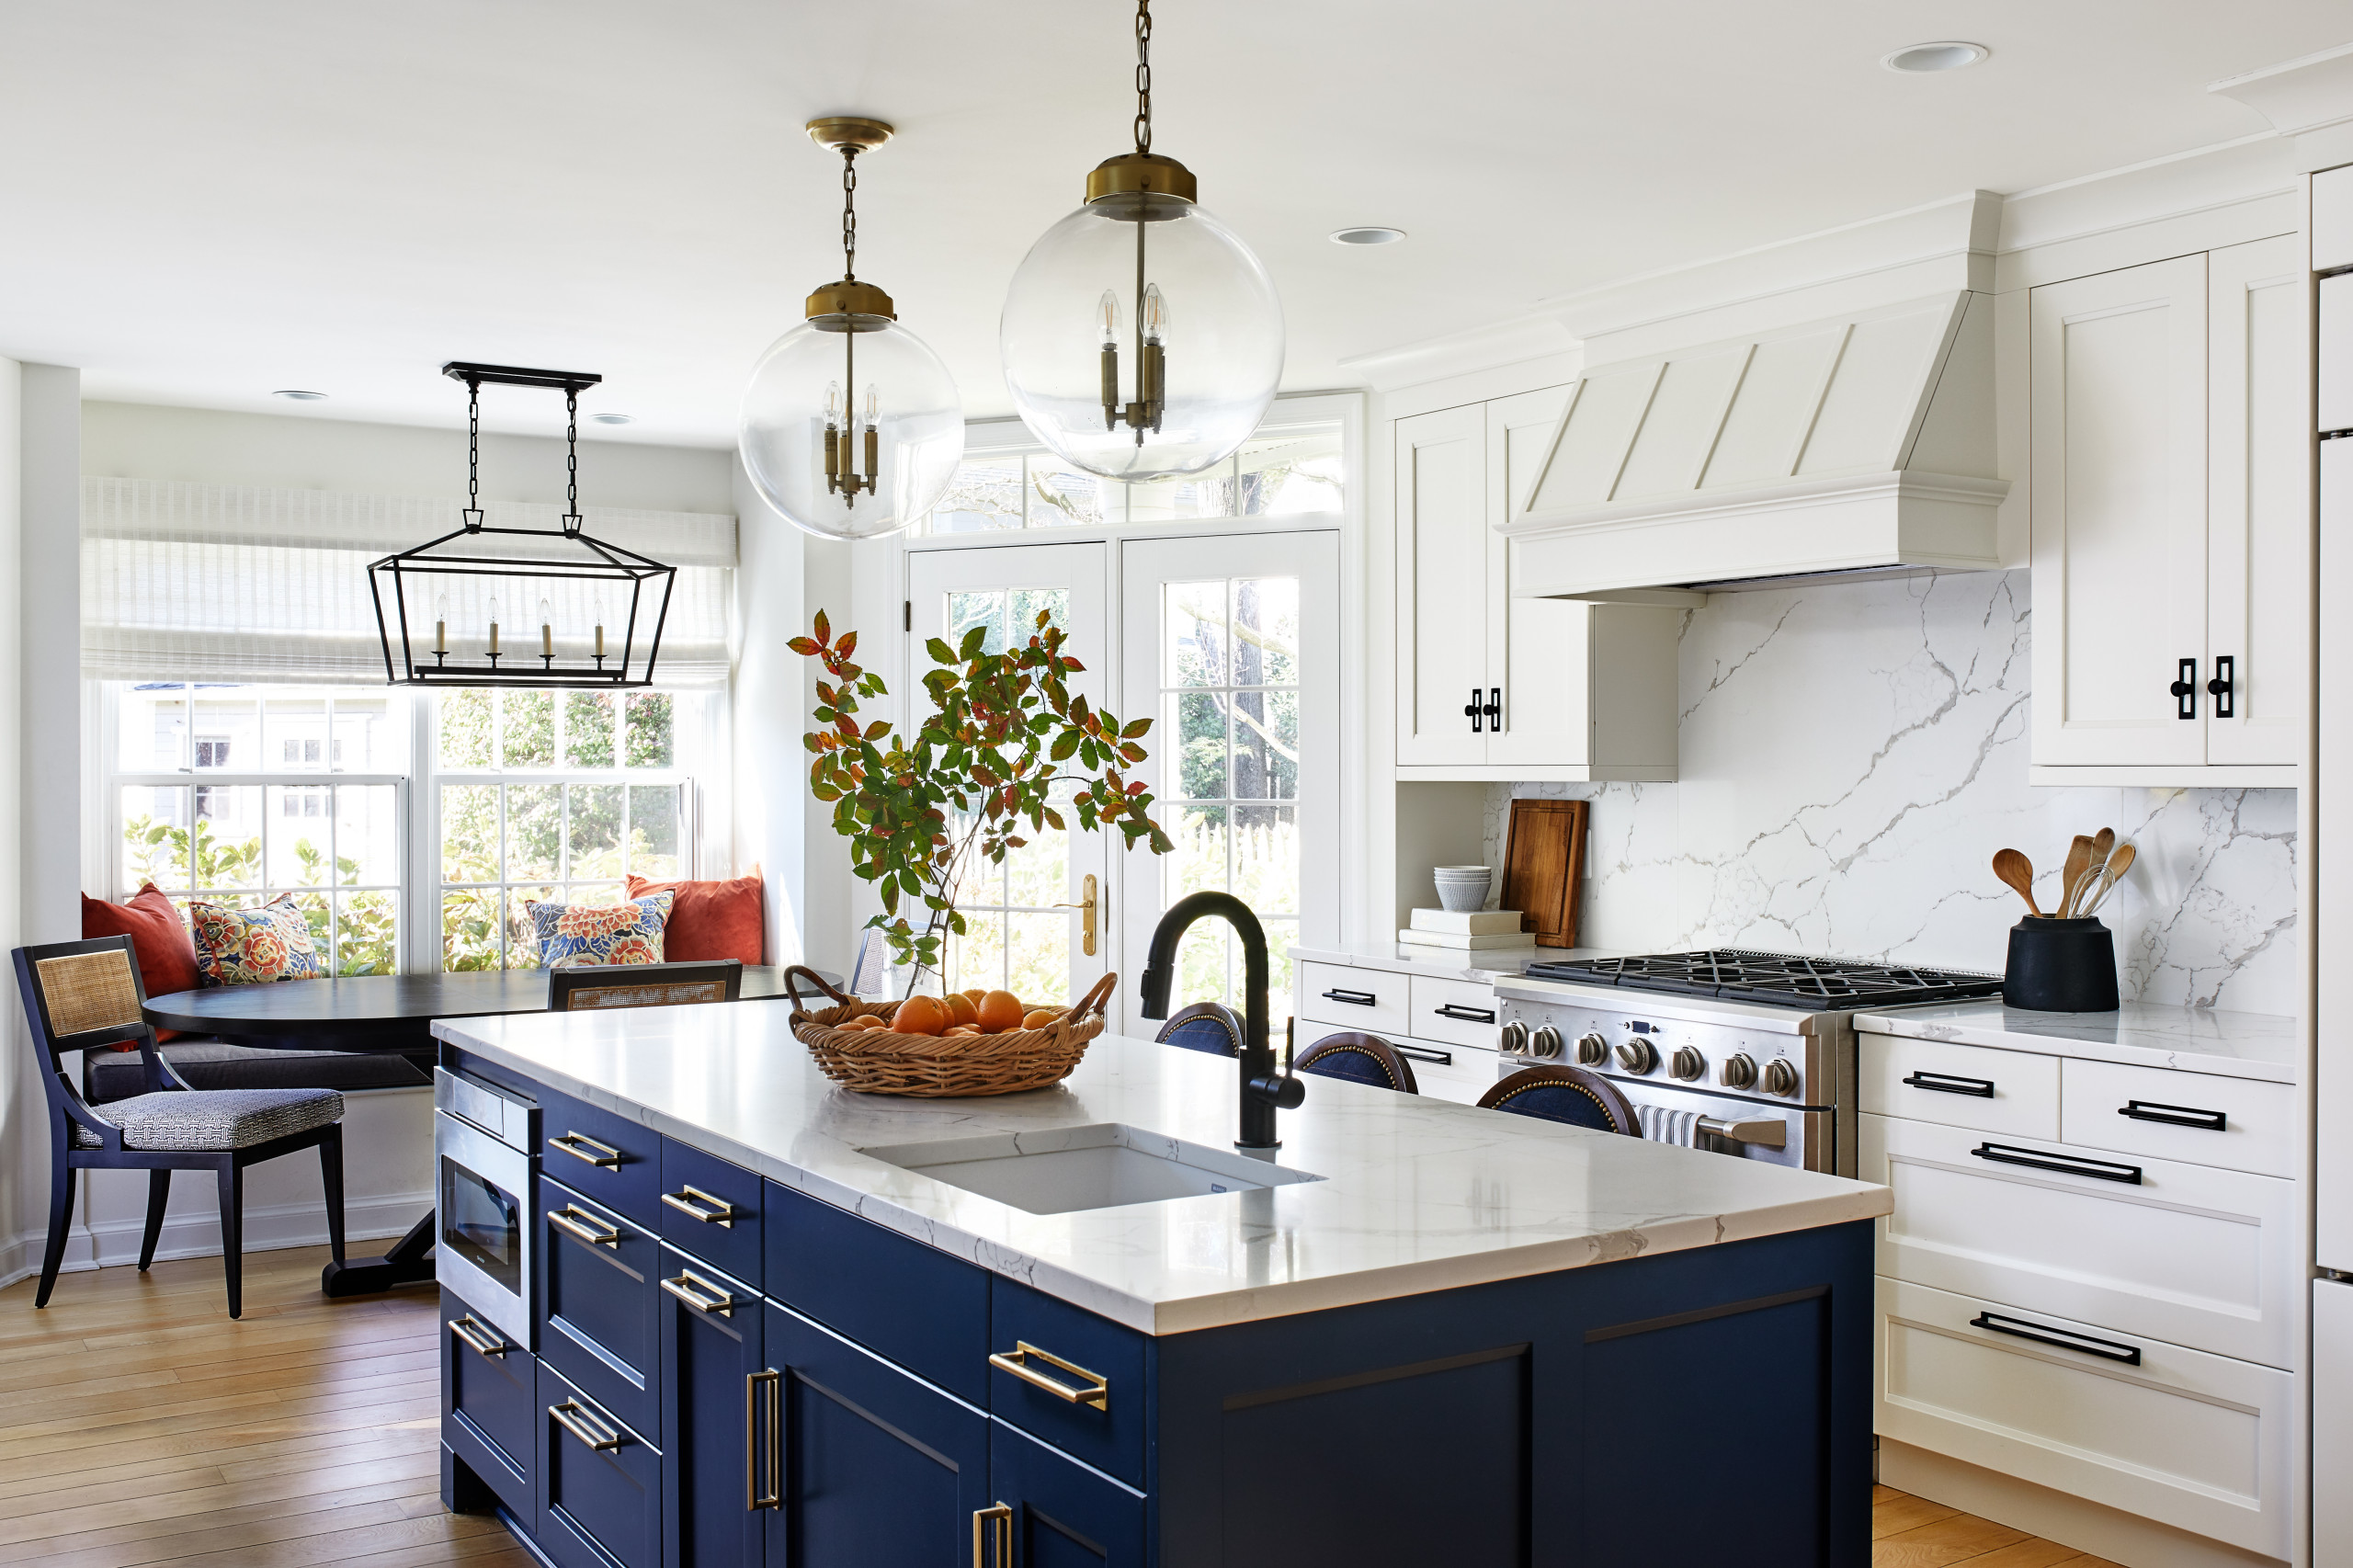 75 Traditional White Kitchen Ideas You'll Love - February, 2023 | Houzz